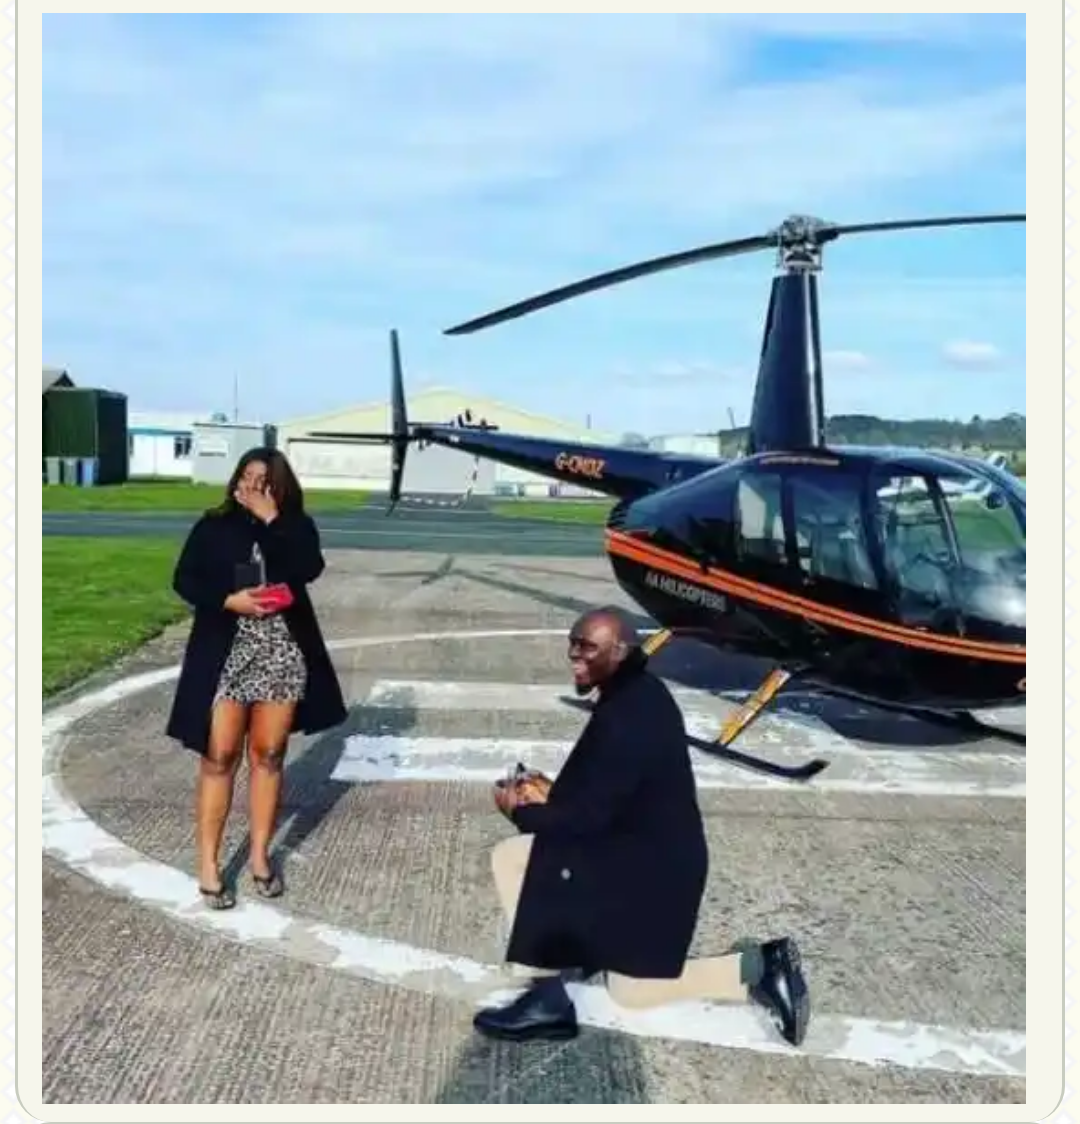 Joy As Nigerian Man Proposes To Girlfriend Of 7 Years With Helicopter. Shares an emotional story